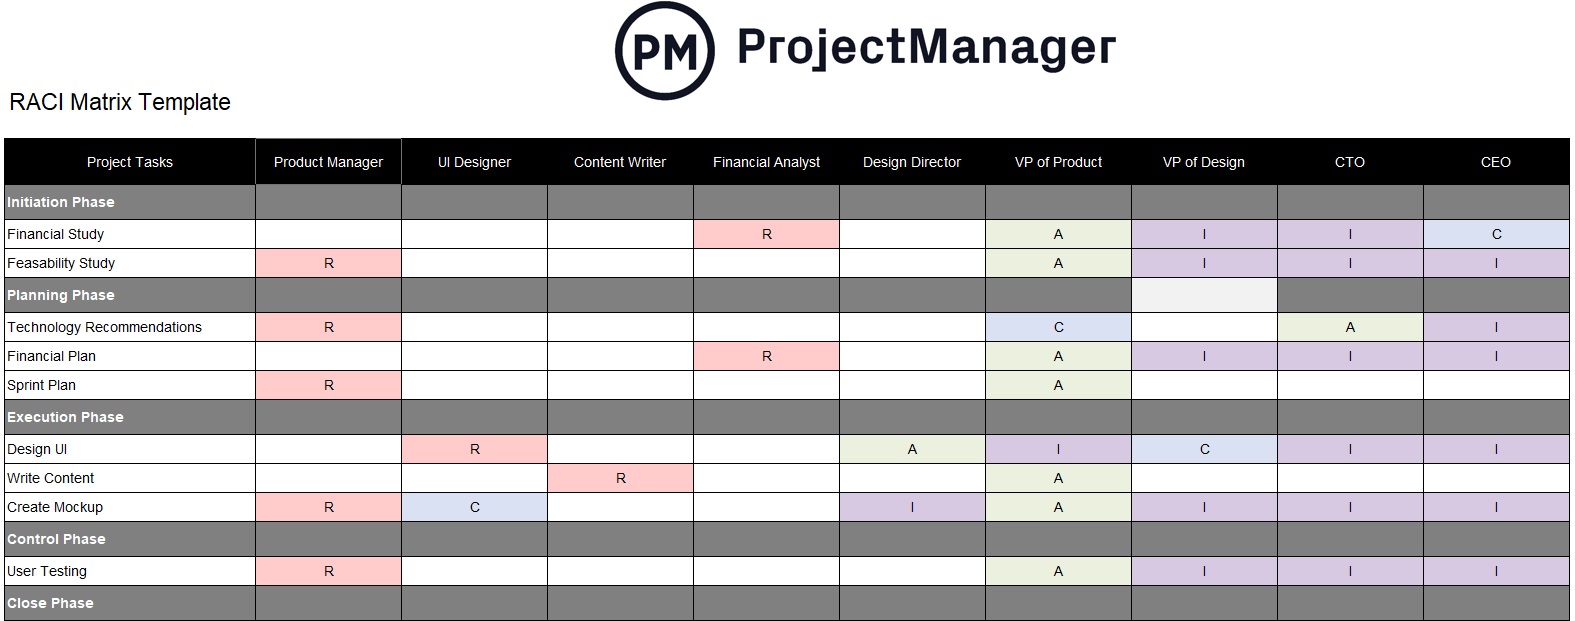 ProjectManager's RACI template for Google